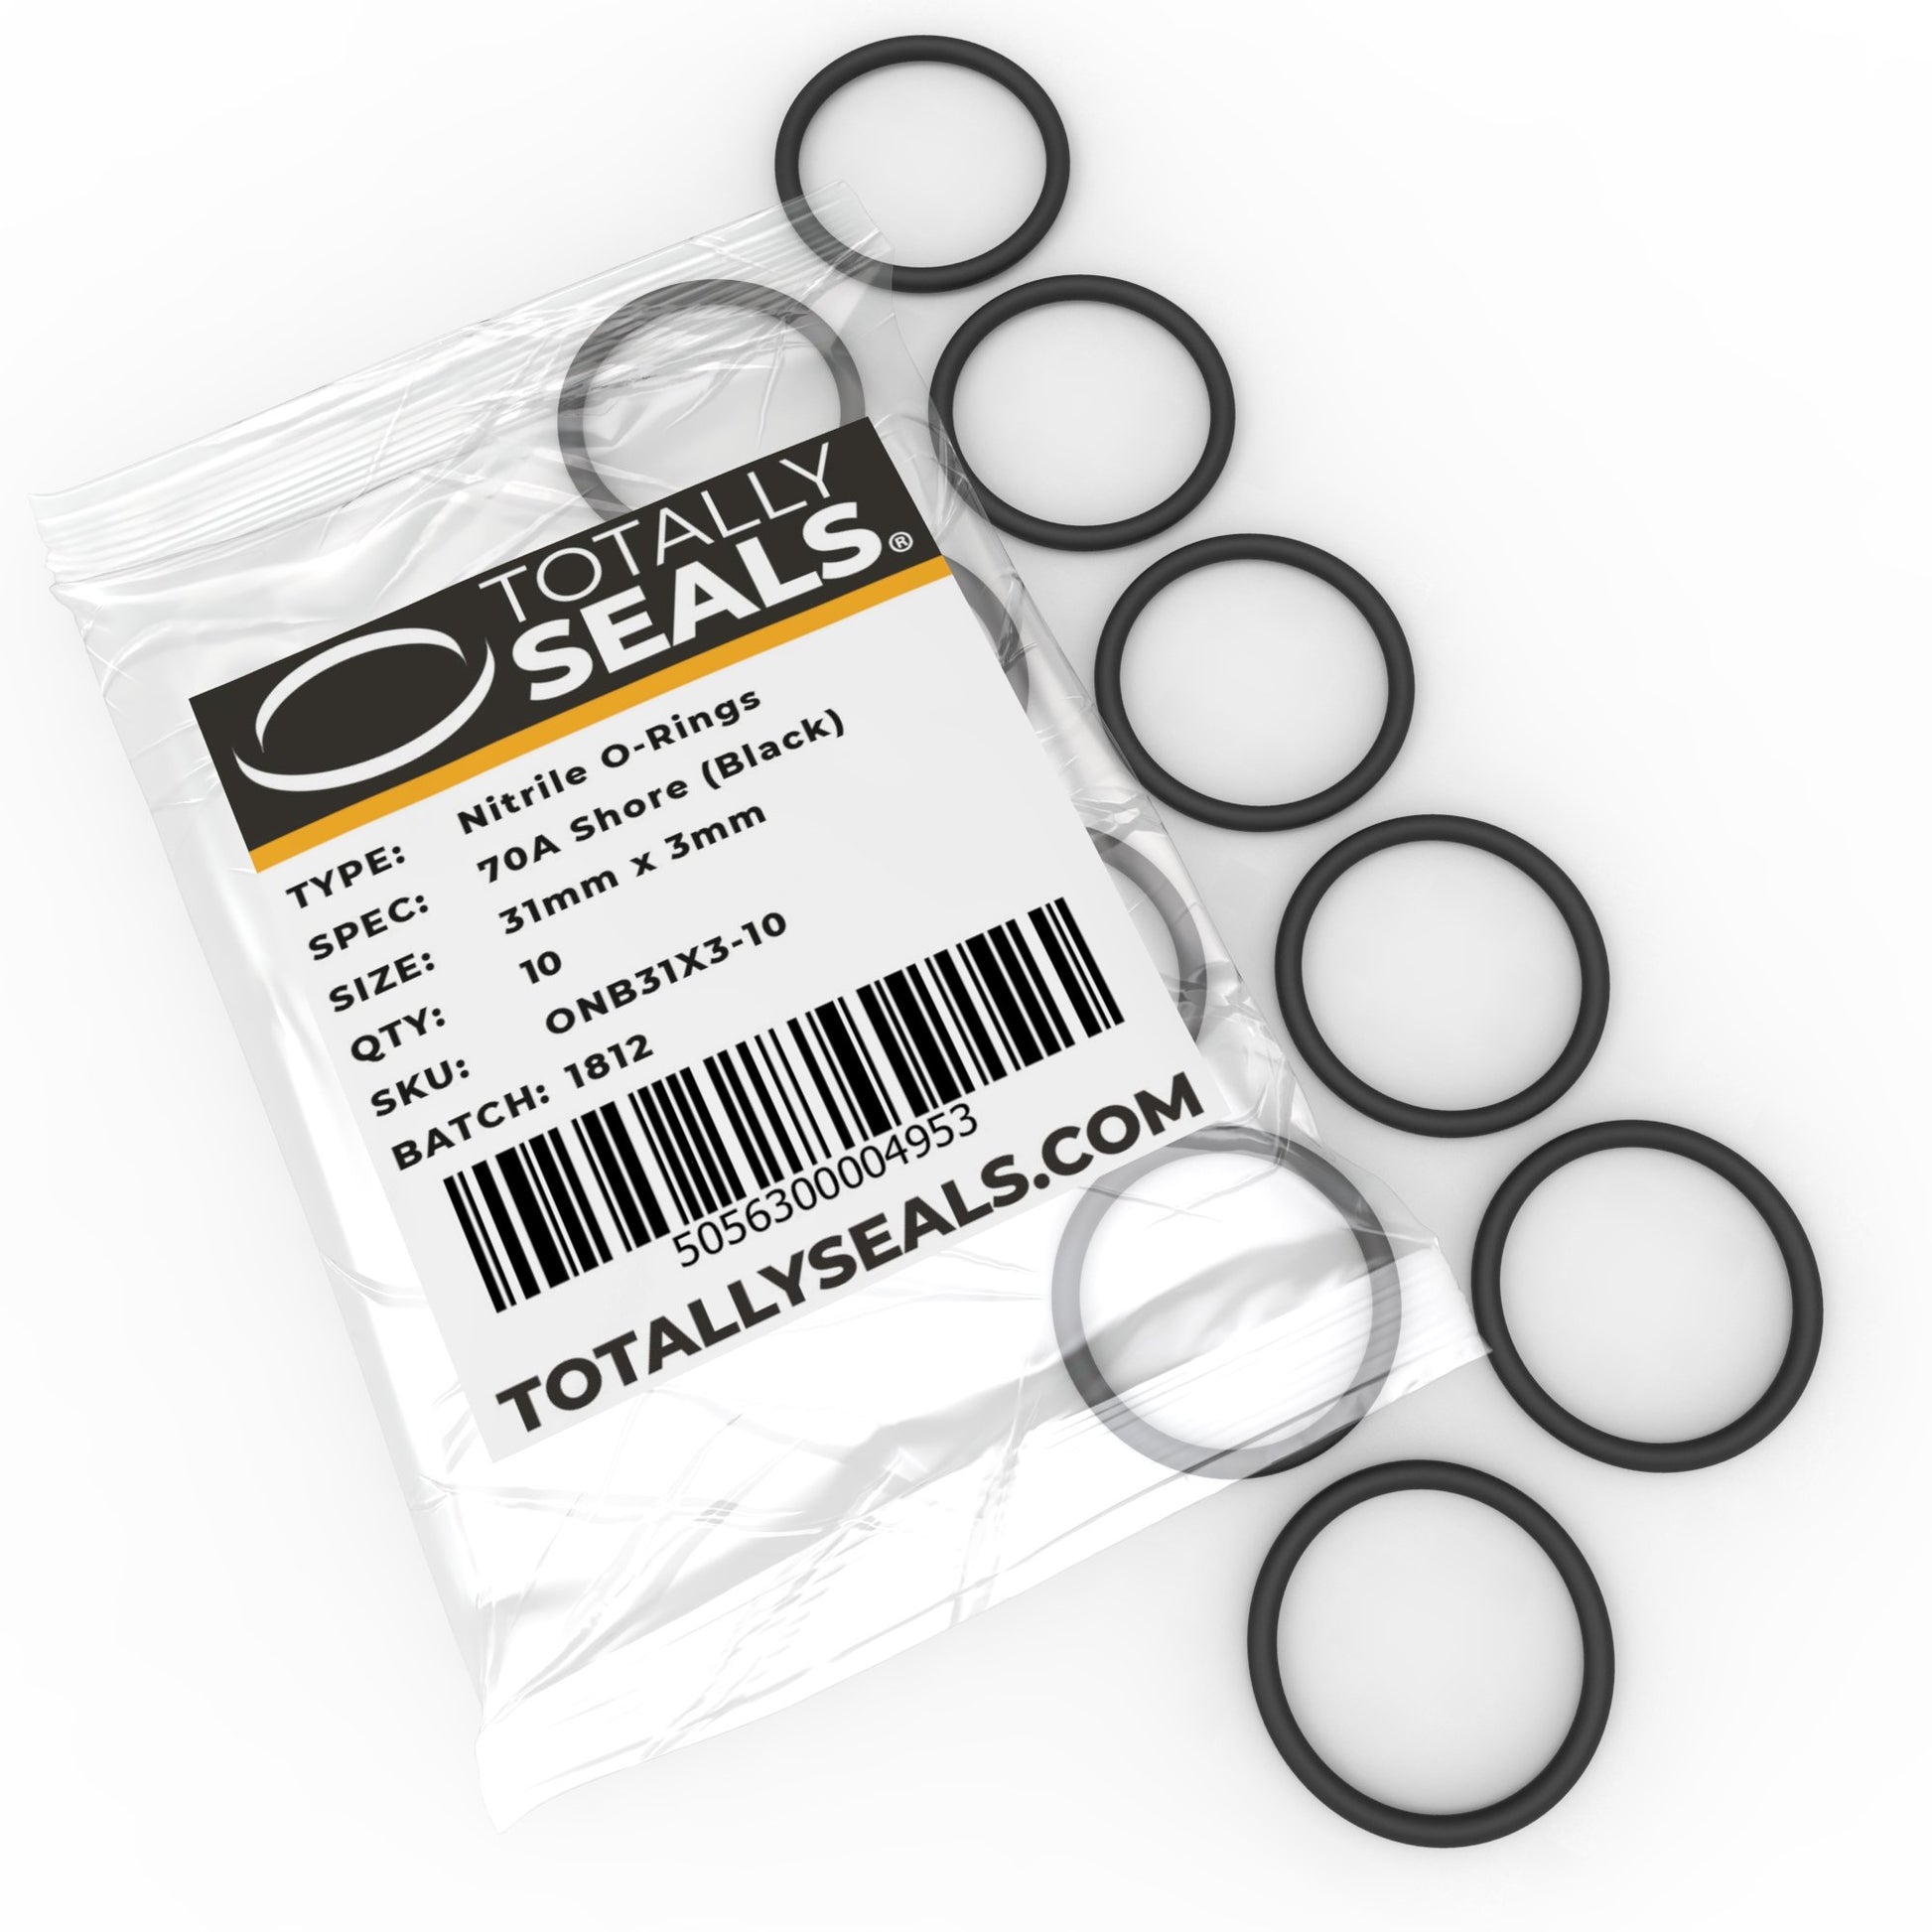 31mm x 3mm (37mm OD) Nitrile O-Rings - Totally Seals®